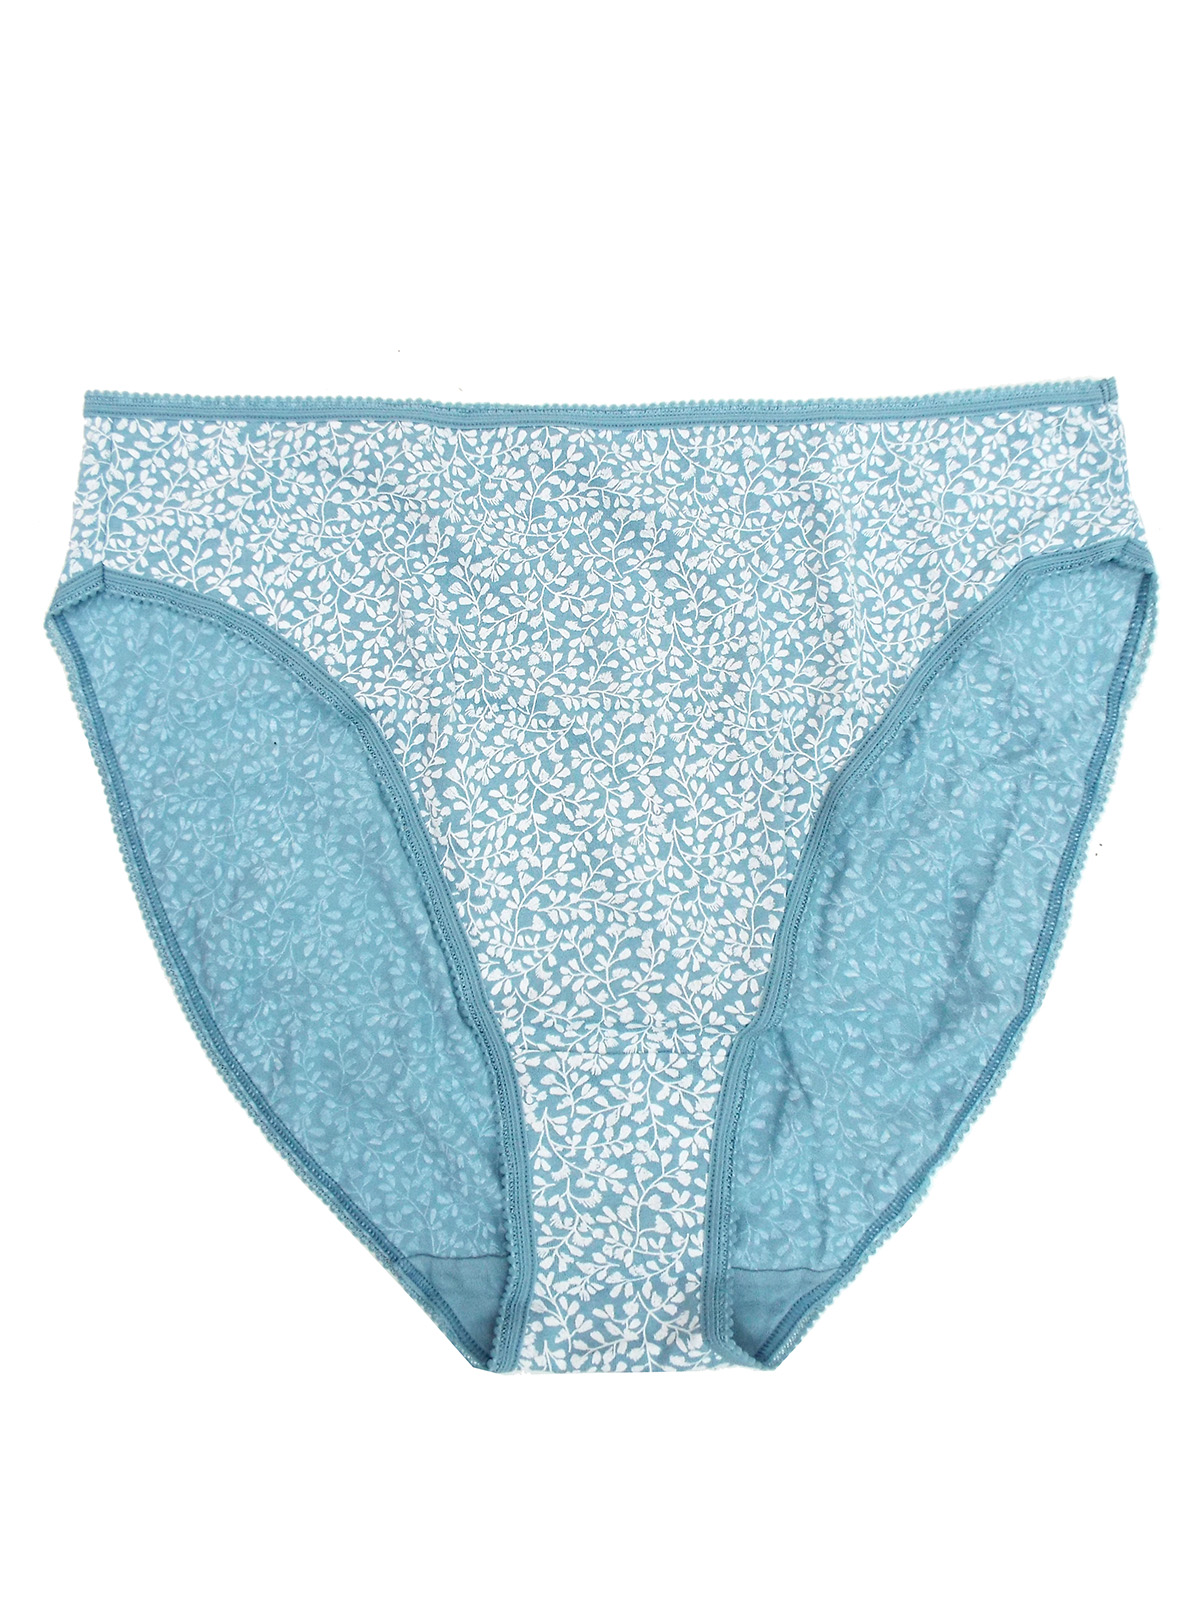 Marks and Spencer - - M&5 BLUE MIX 5-Pack Pure Cotton High Leg Knickers - Size 18 and 24